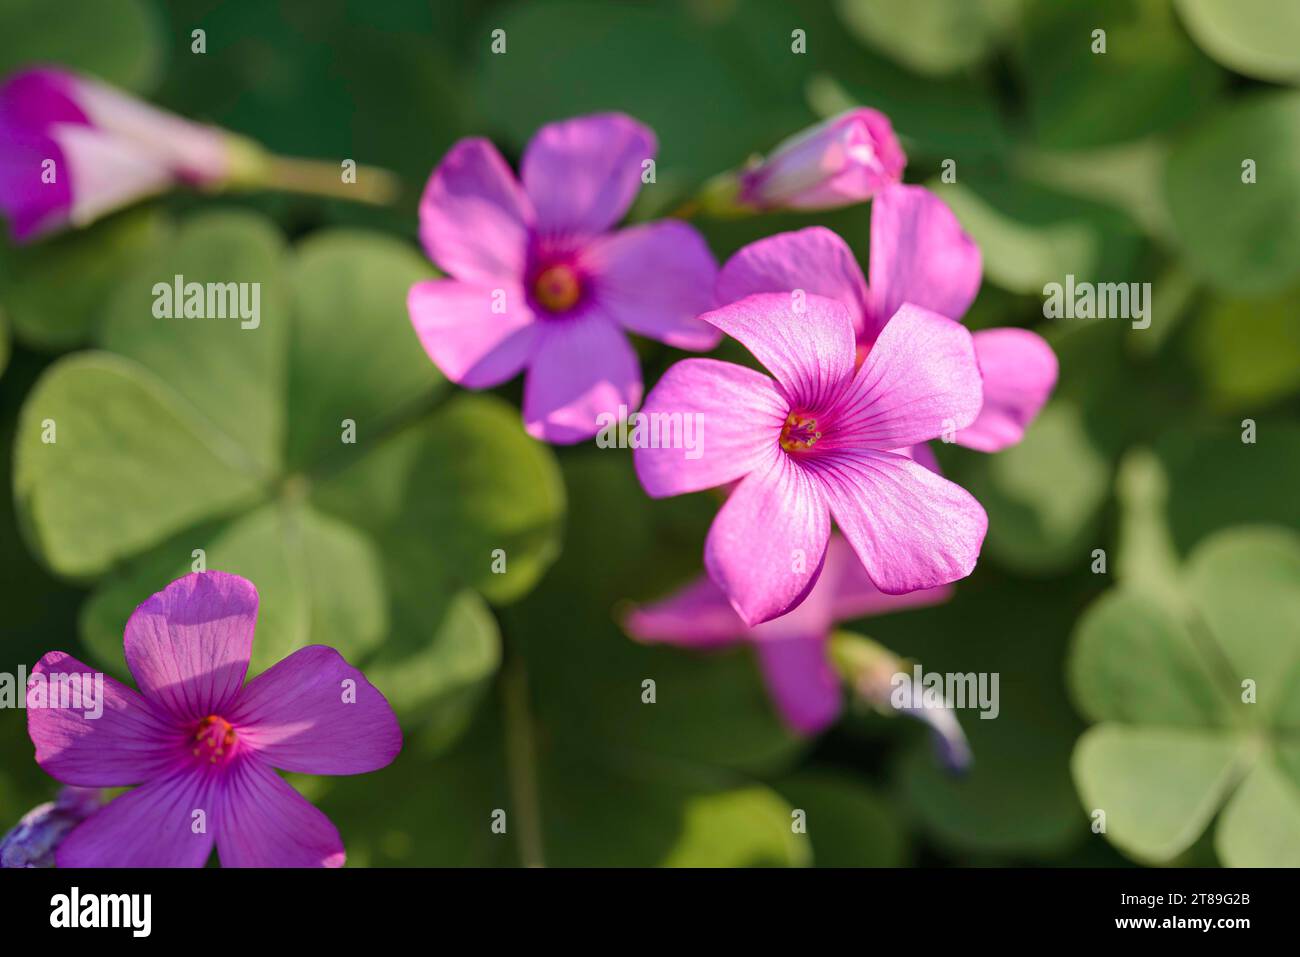 Pink Erodium ciconium flower, also known as Heron's bill, Storksbills or Filarees, on green leaves background Stock Photo